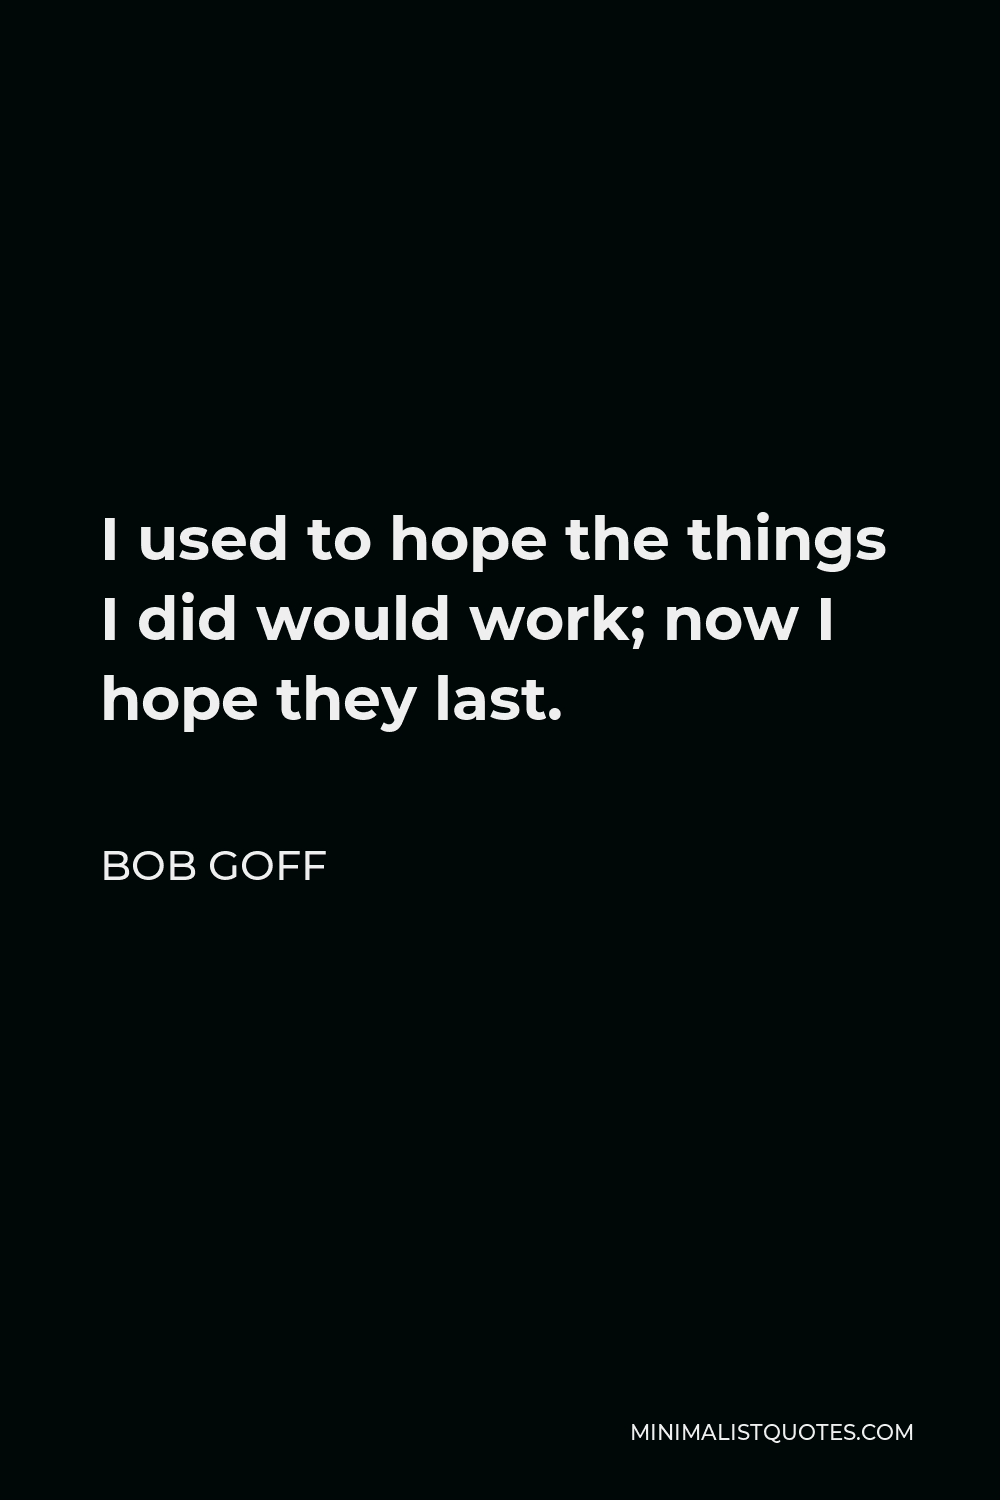 Bob Goff Quote - I used to hope the things I did would work; now I hope they last.